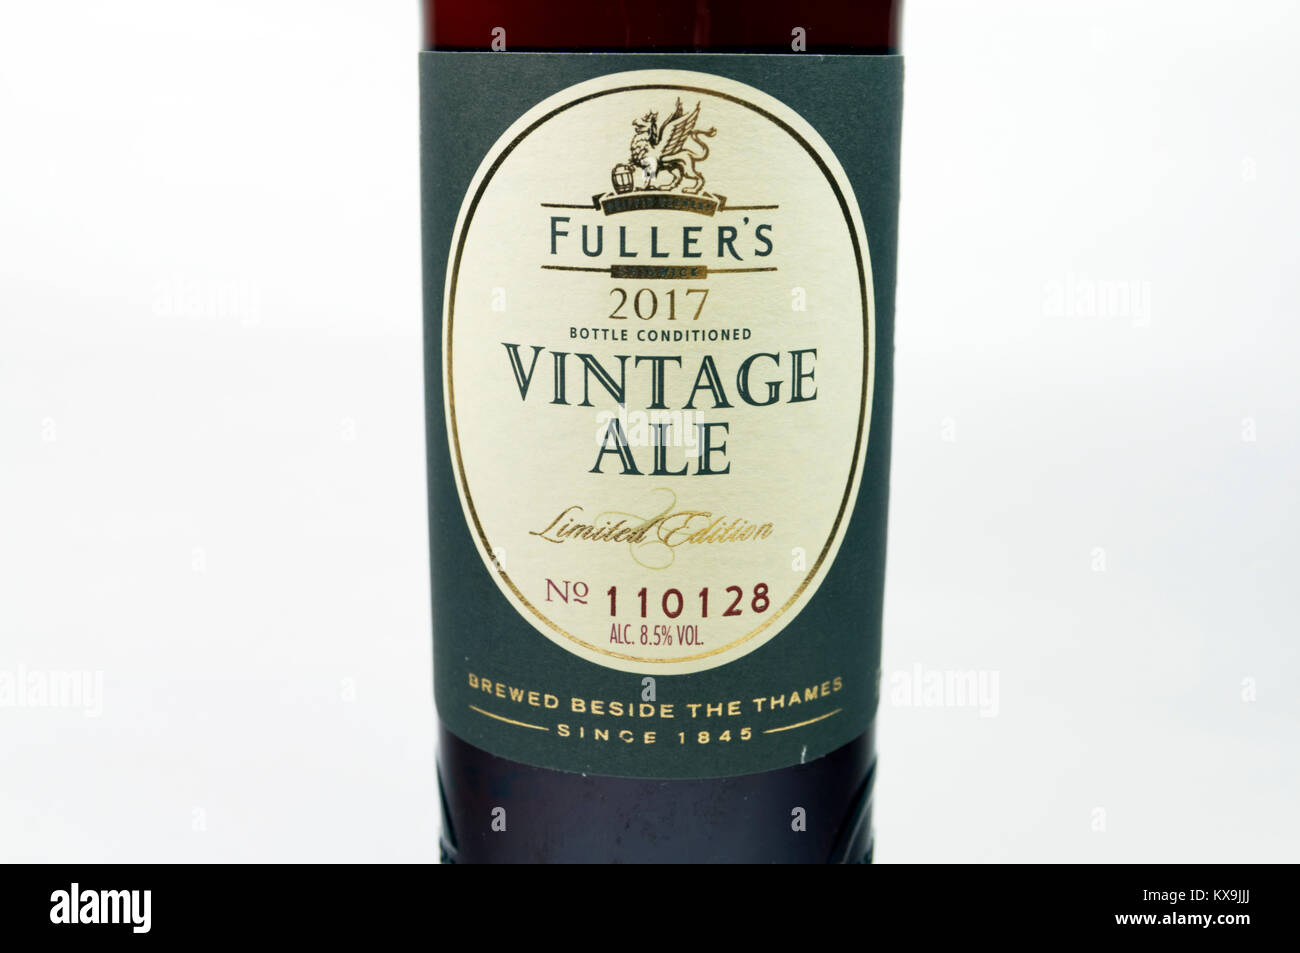 Fullers limited edition Vintage Ale, 2017. Stockfoto